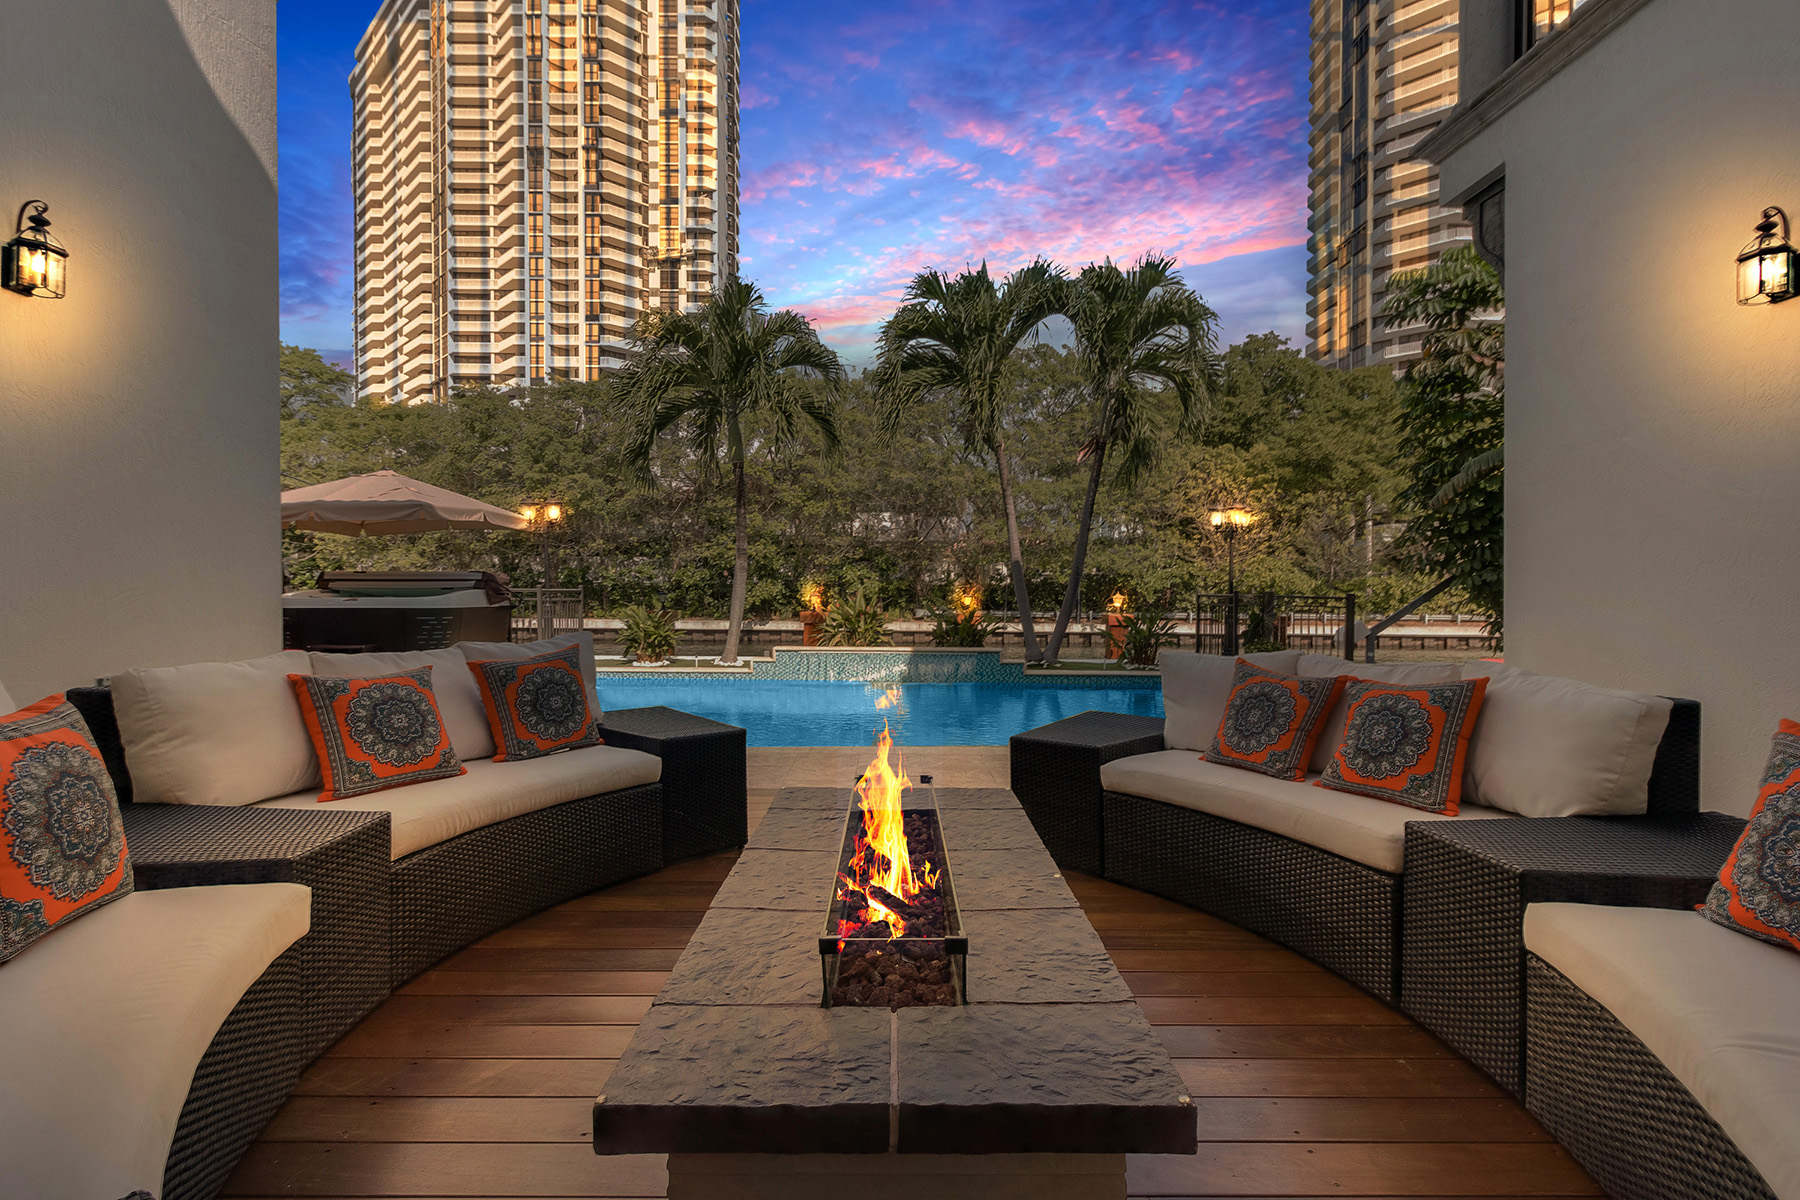 A fire pit amid contemporary furniture by hte pool at a modern home in North Miami Beach